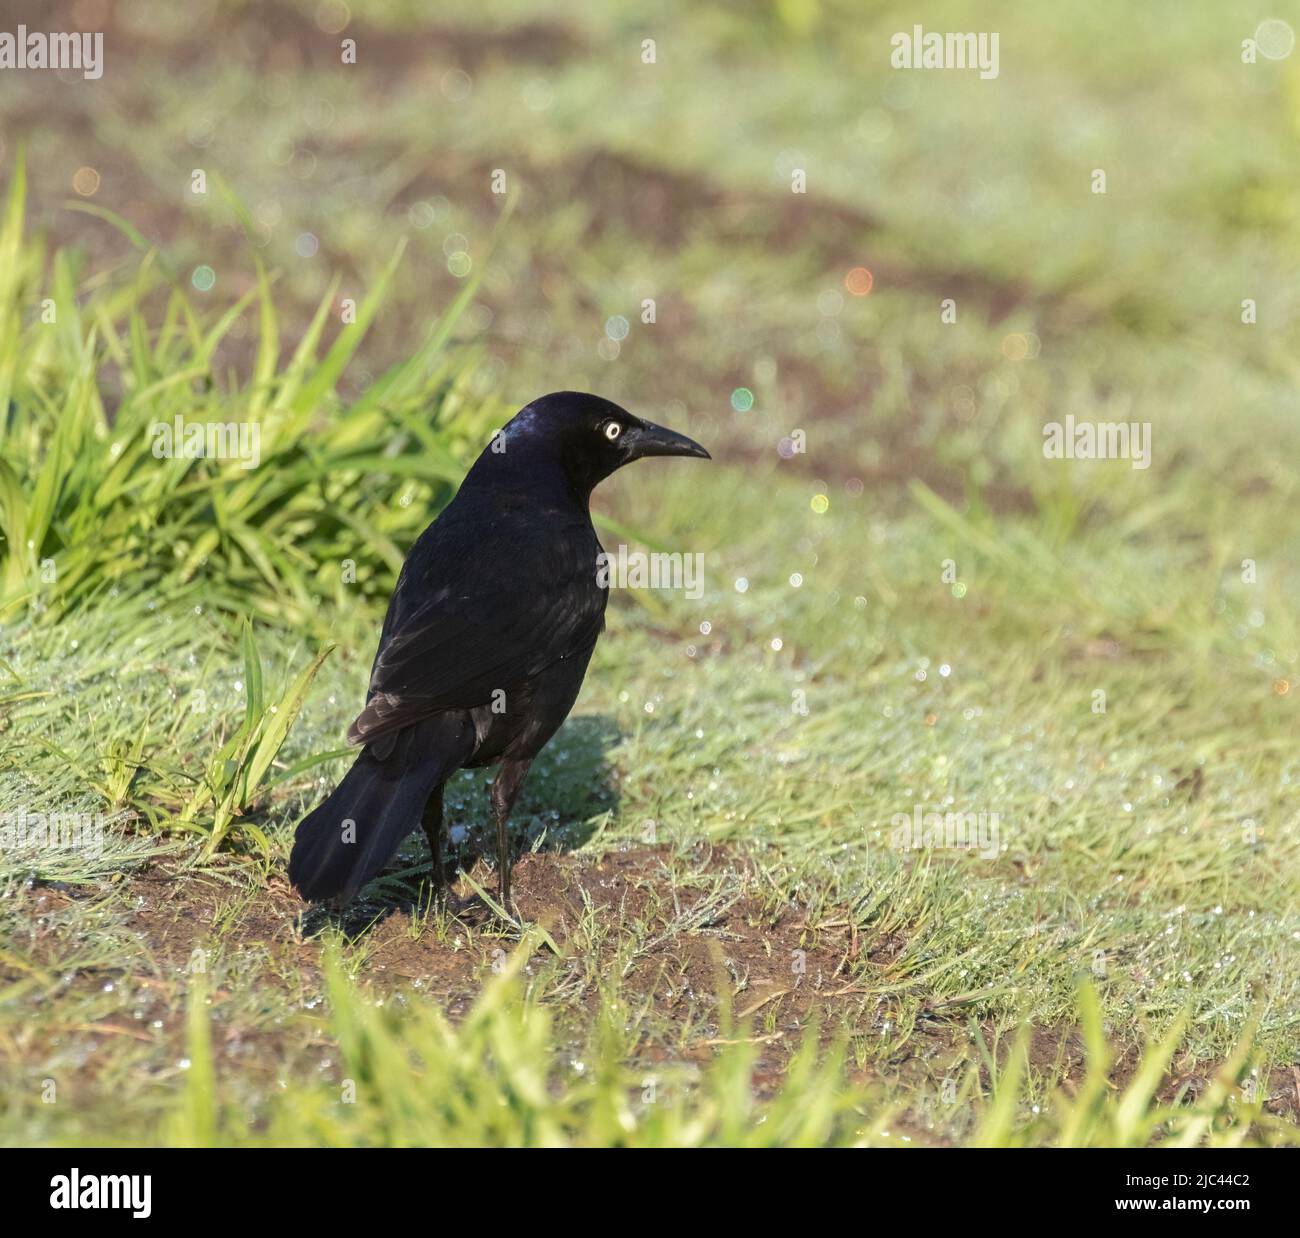 A Common Grackle on grass Stock Photo